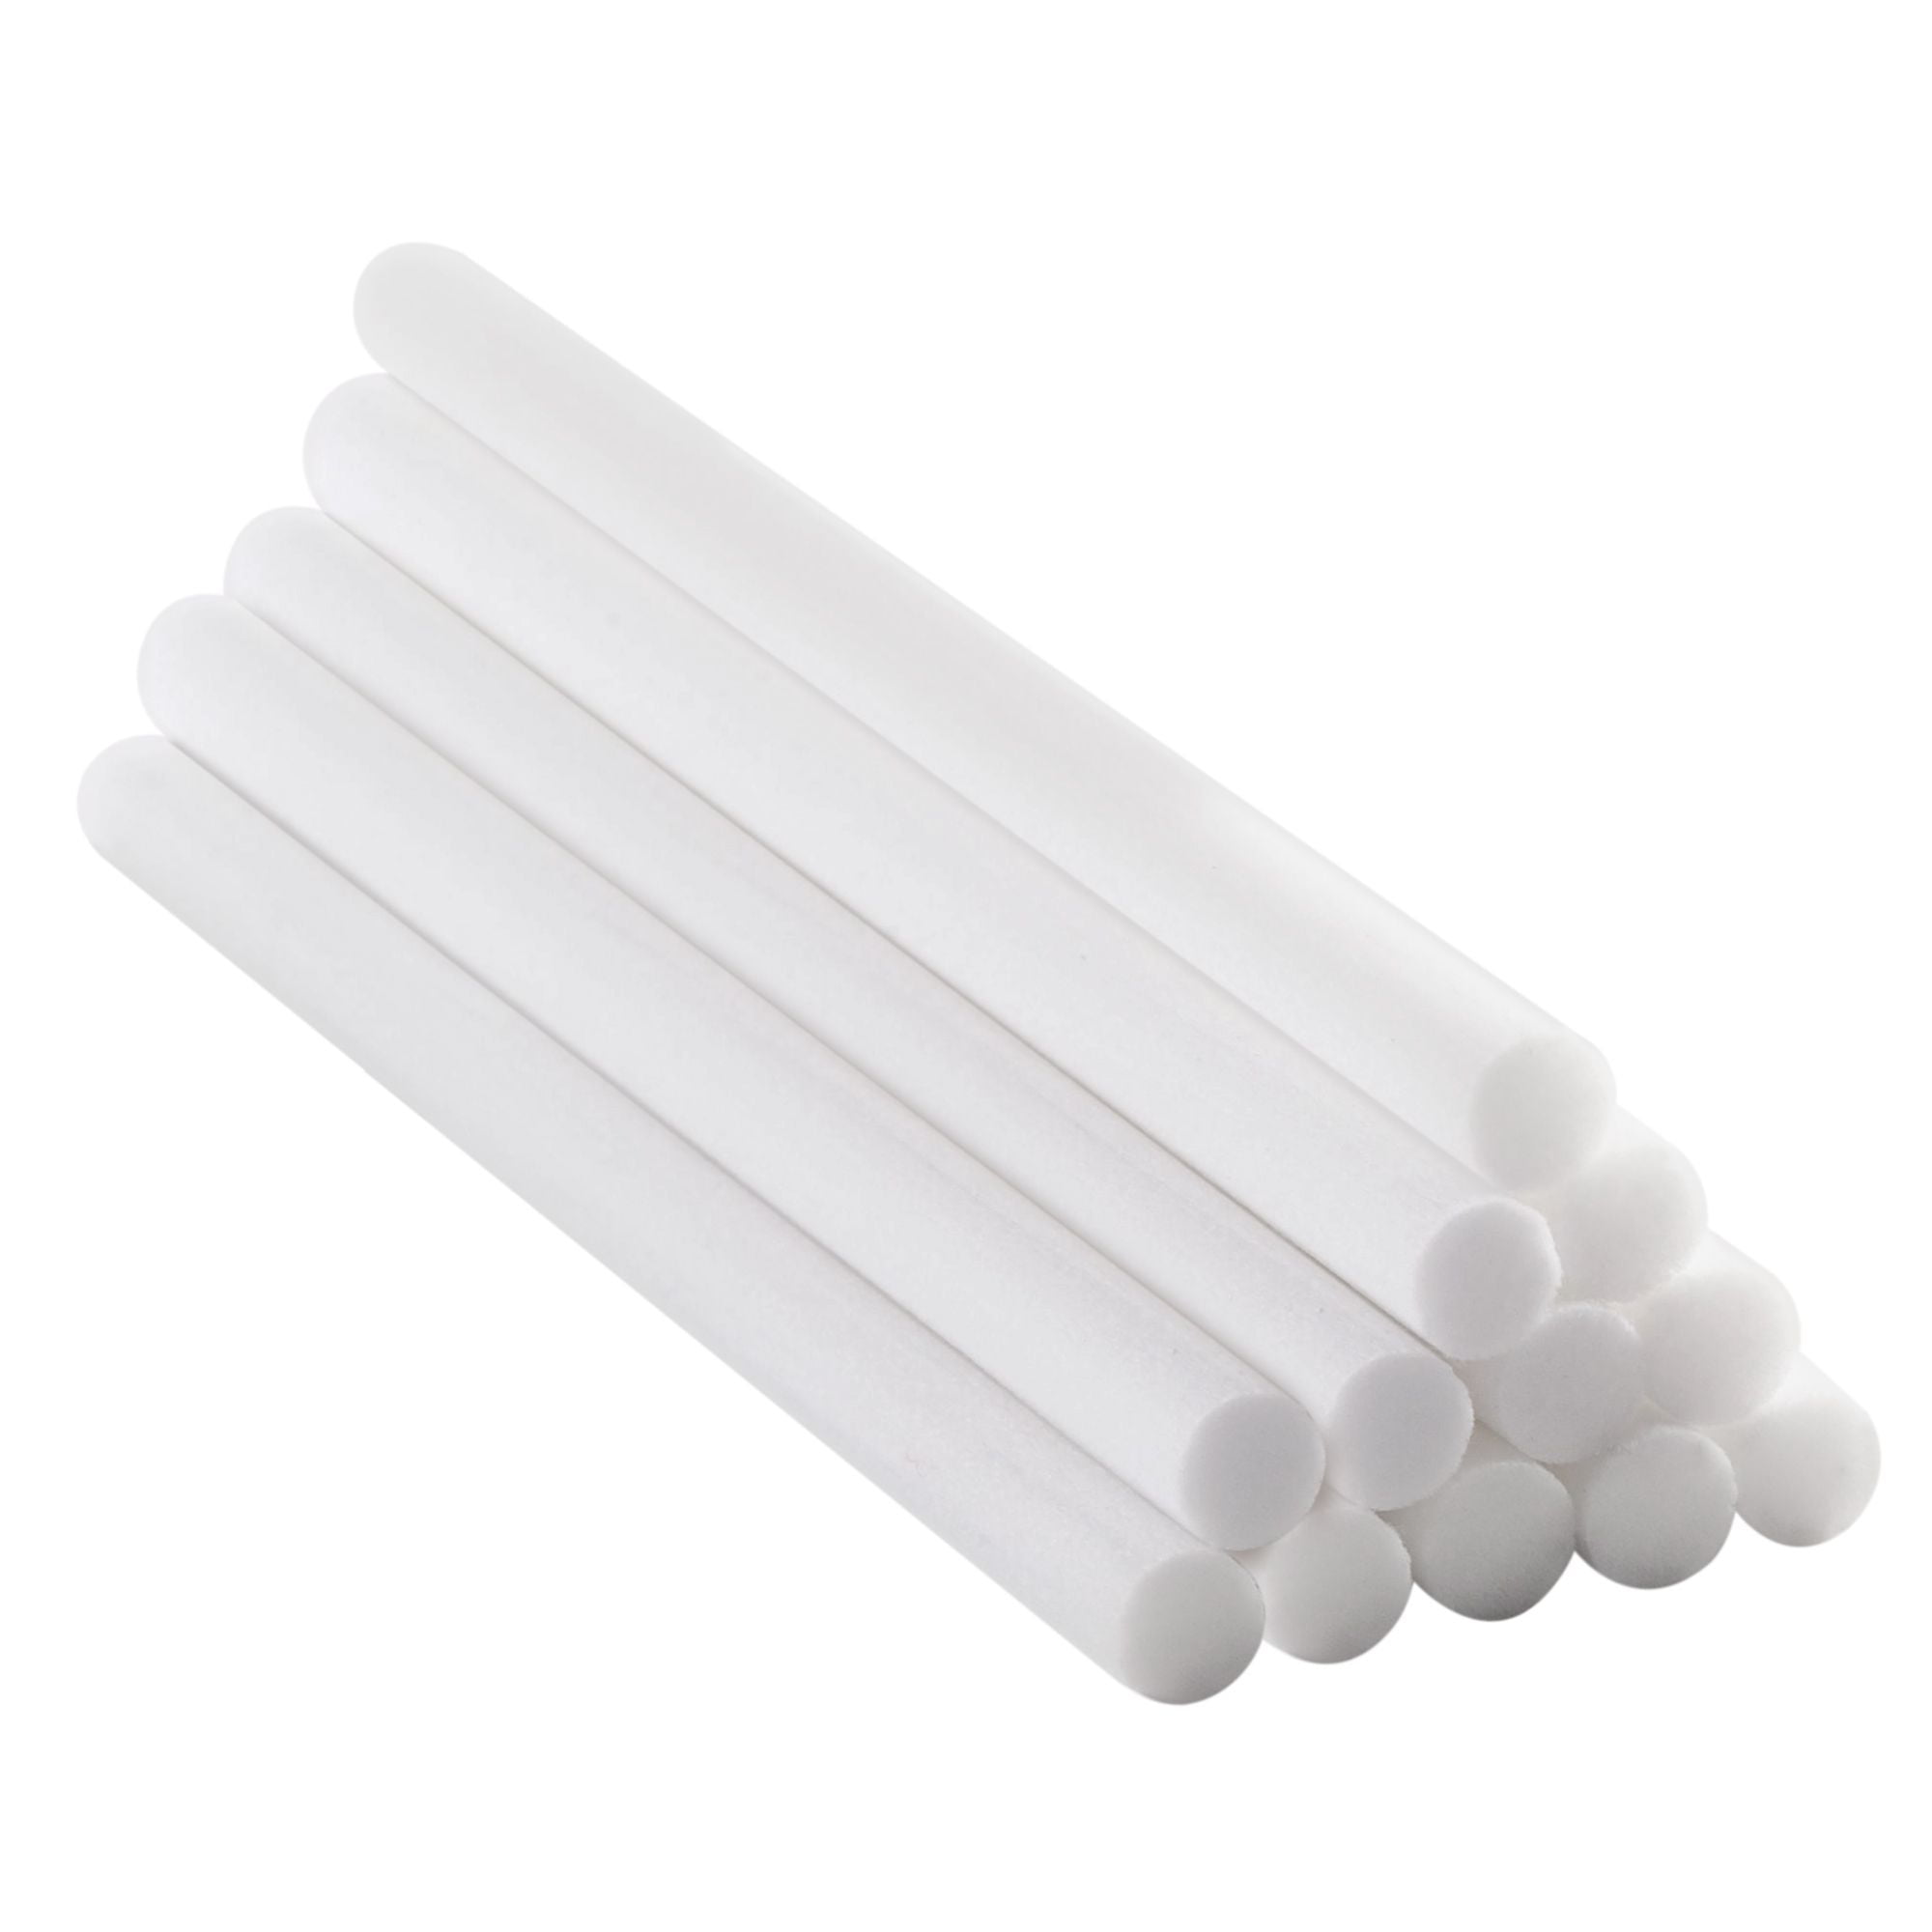 Cuasting 40Pcs Cotton Swab Filters Refill Sticks Replacement Wicks for Portable Personal USB Powered Humidifiers Aroma Maker 